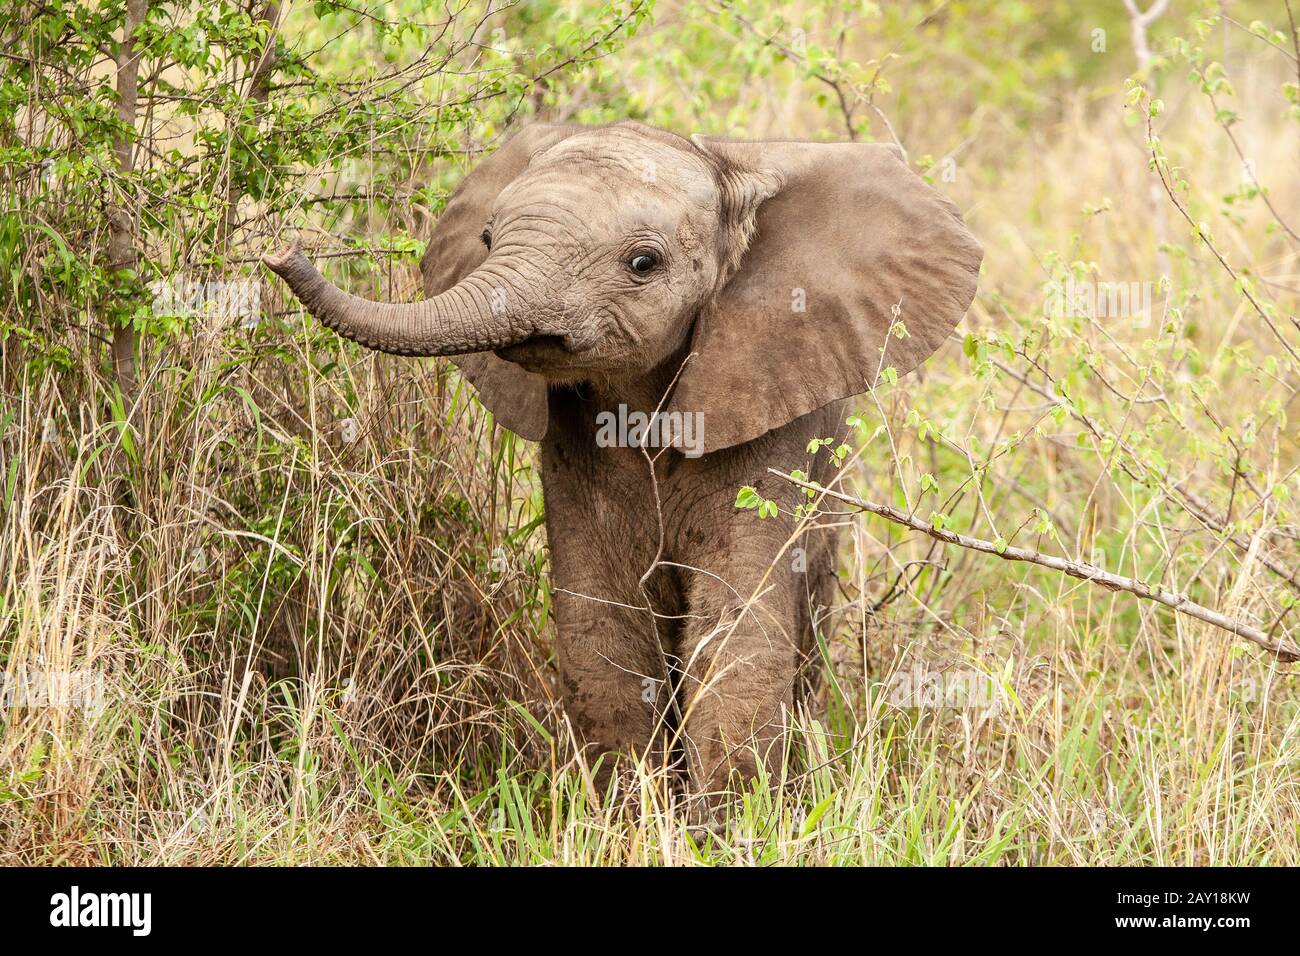 An elephant calf, Loxodonta africana, lifts its trunk while standing in greenery Stock Photo